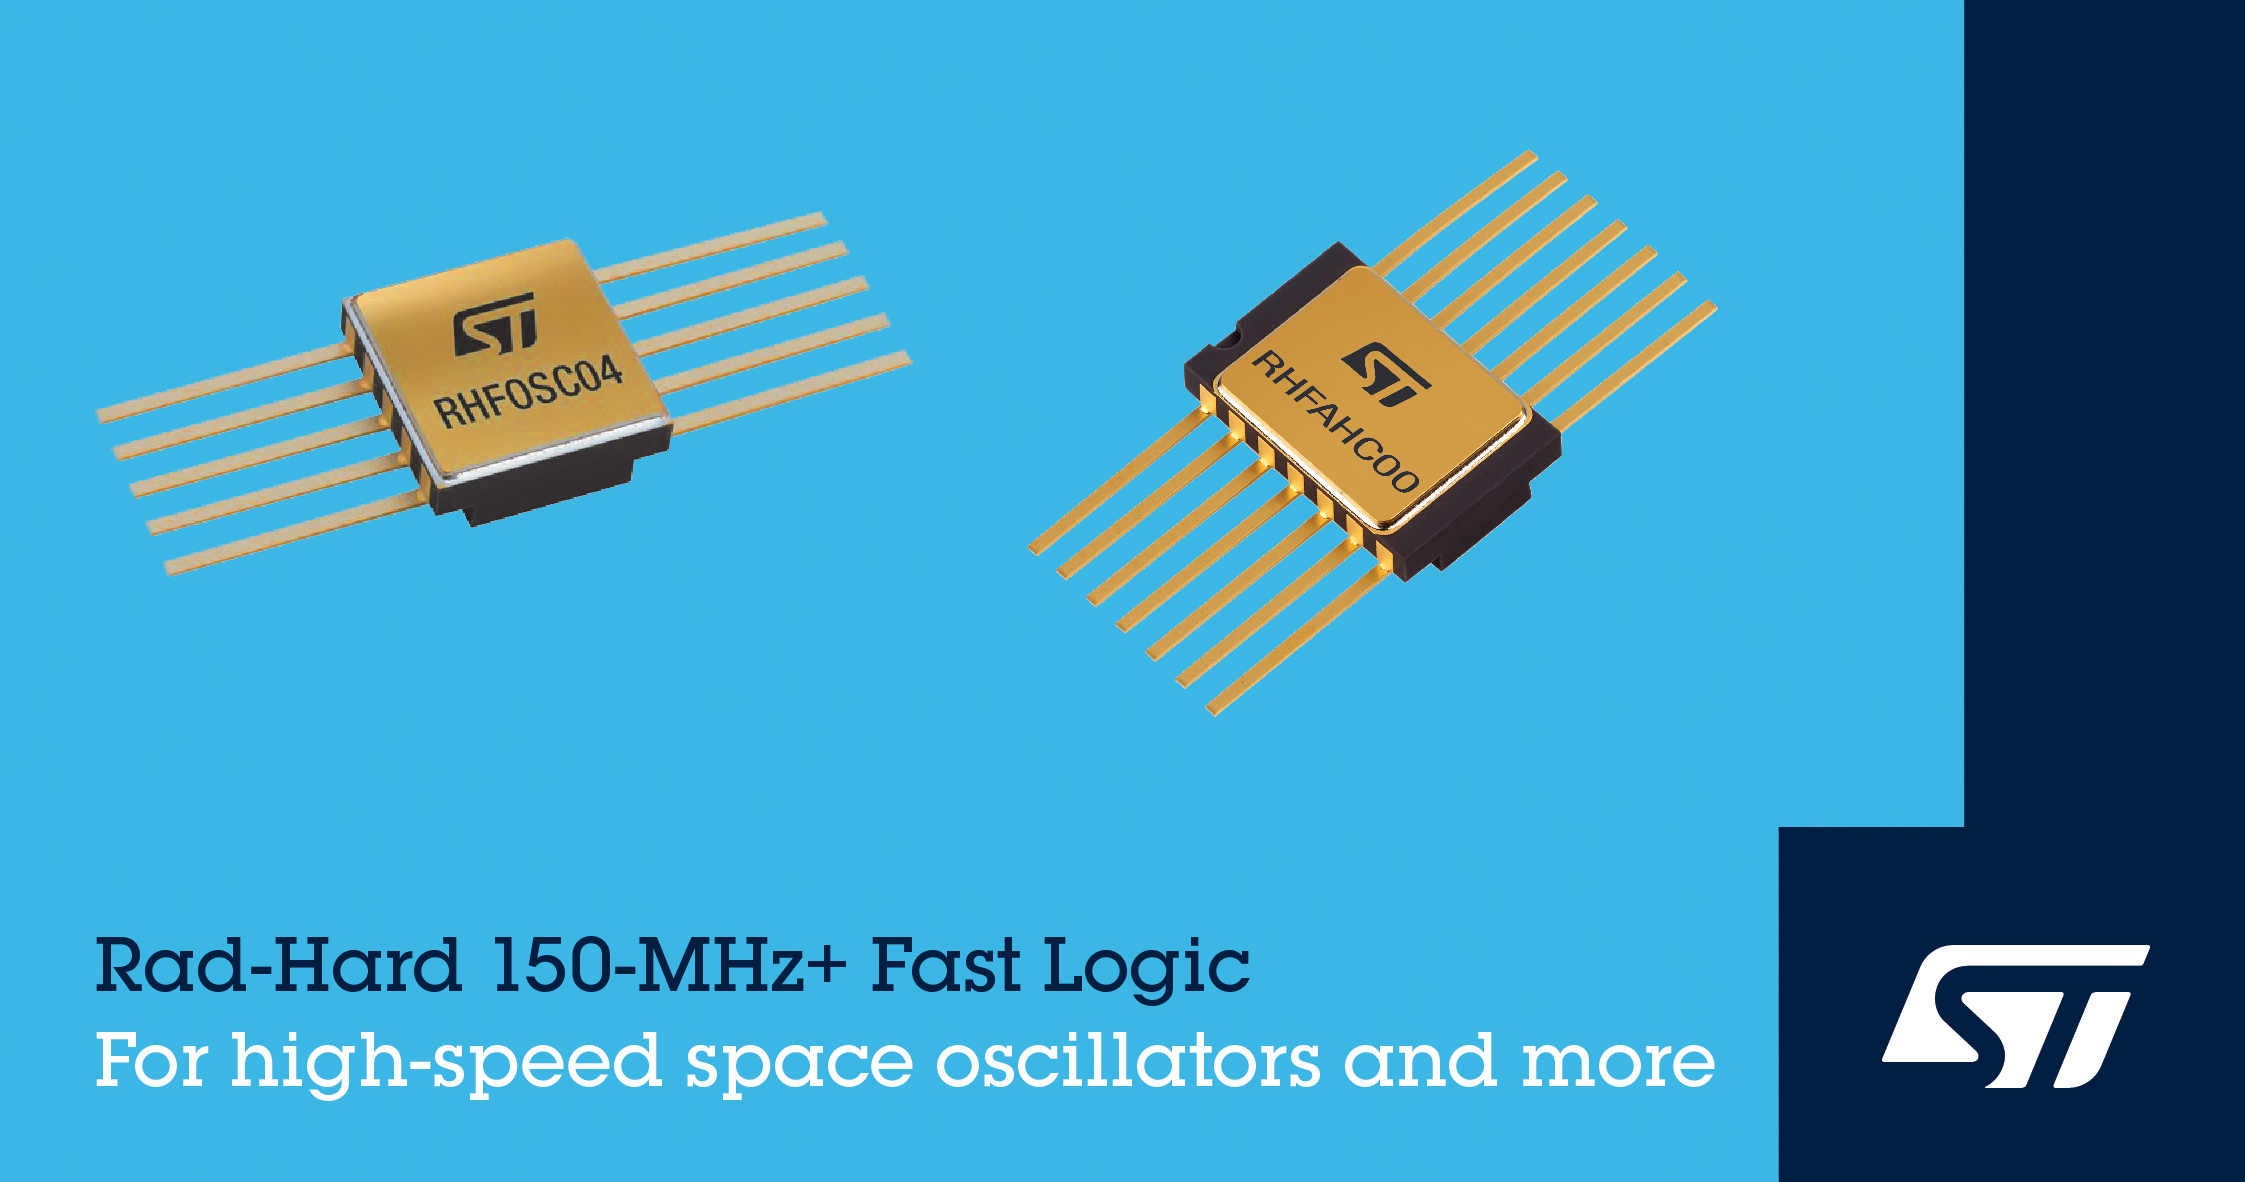 STMicroelectronics Accelerates Space Applications with 150MHz+ High-Speed Rad-Hard Logic